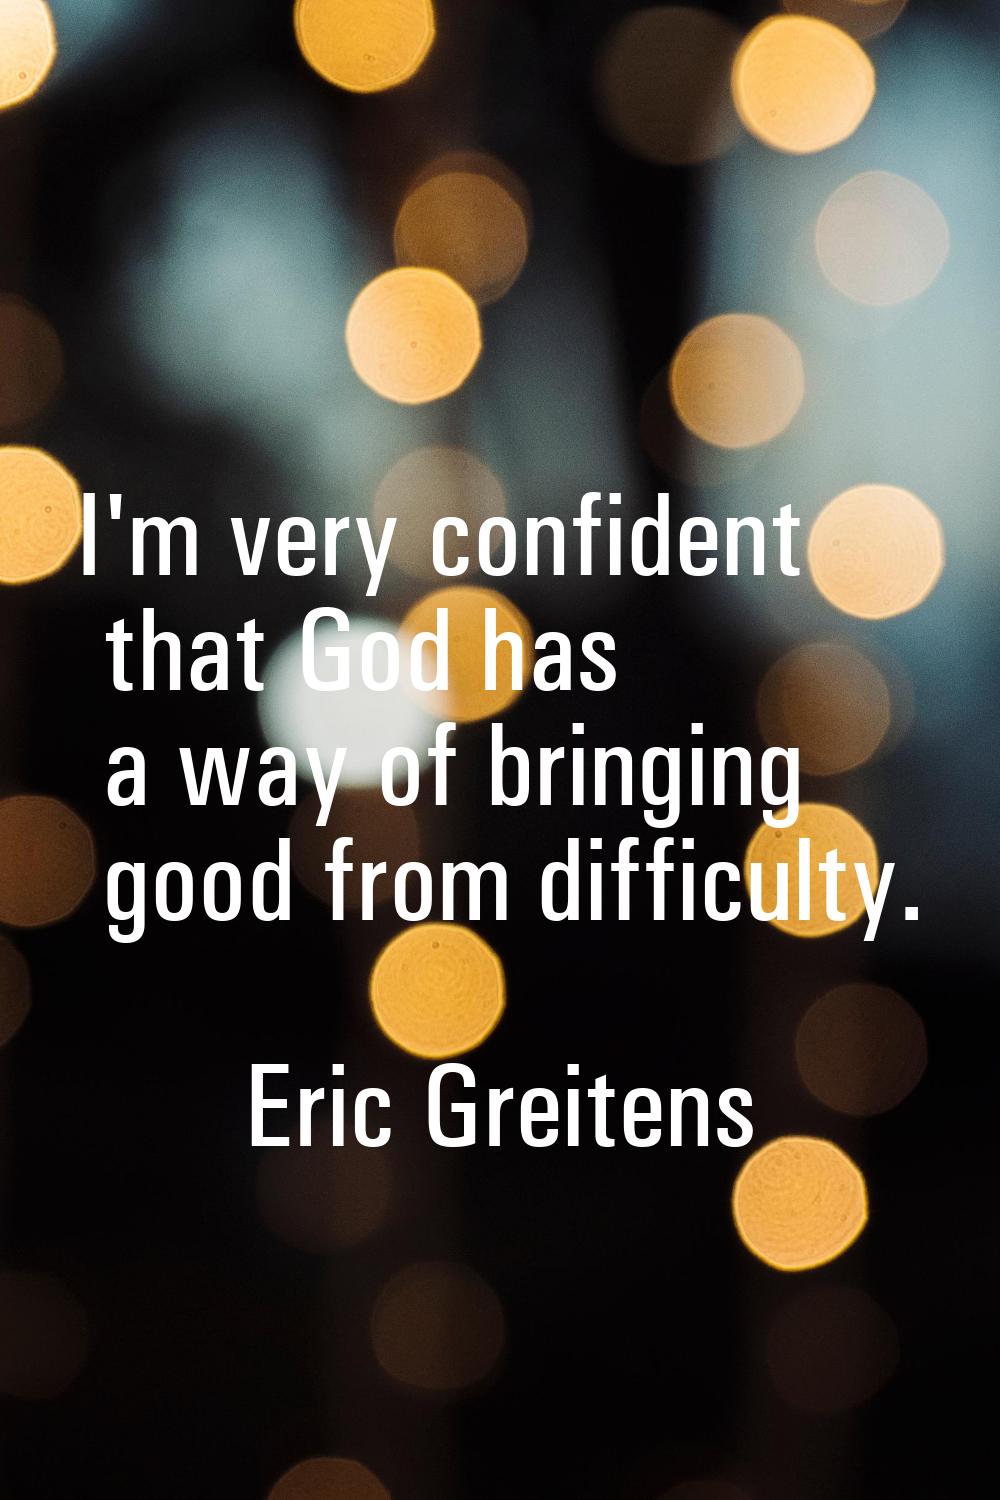 I'm very confident that God has a way of bringing good from difficulty.